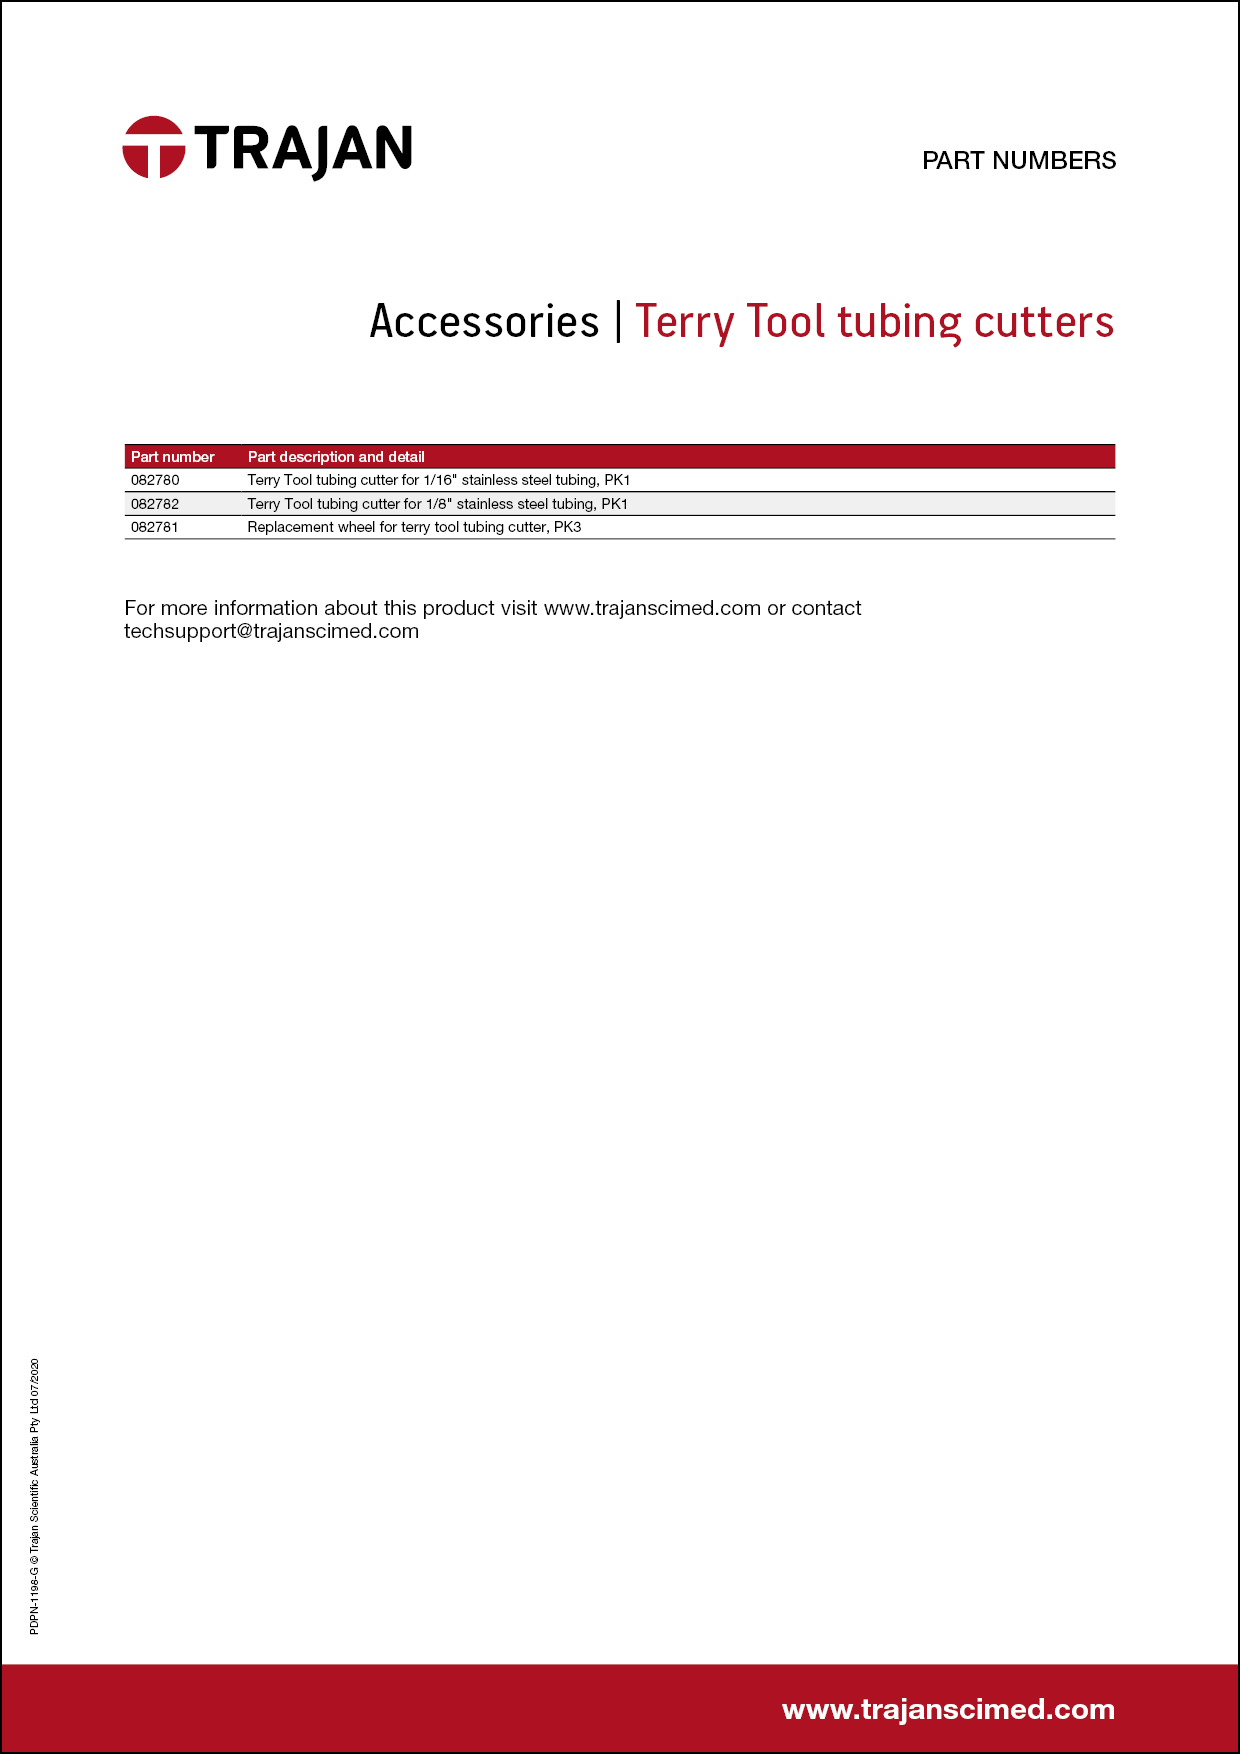 Part Number List - Terry Tool tubing cutters